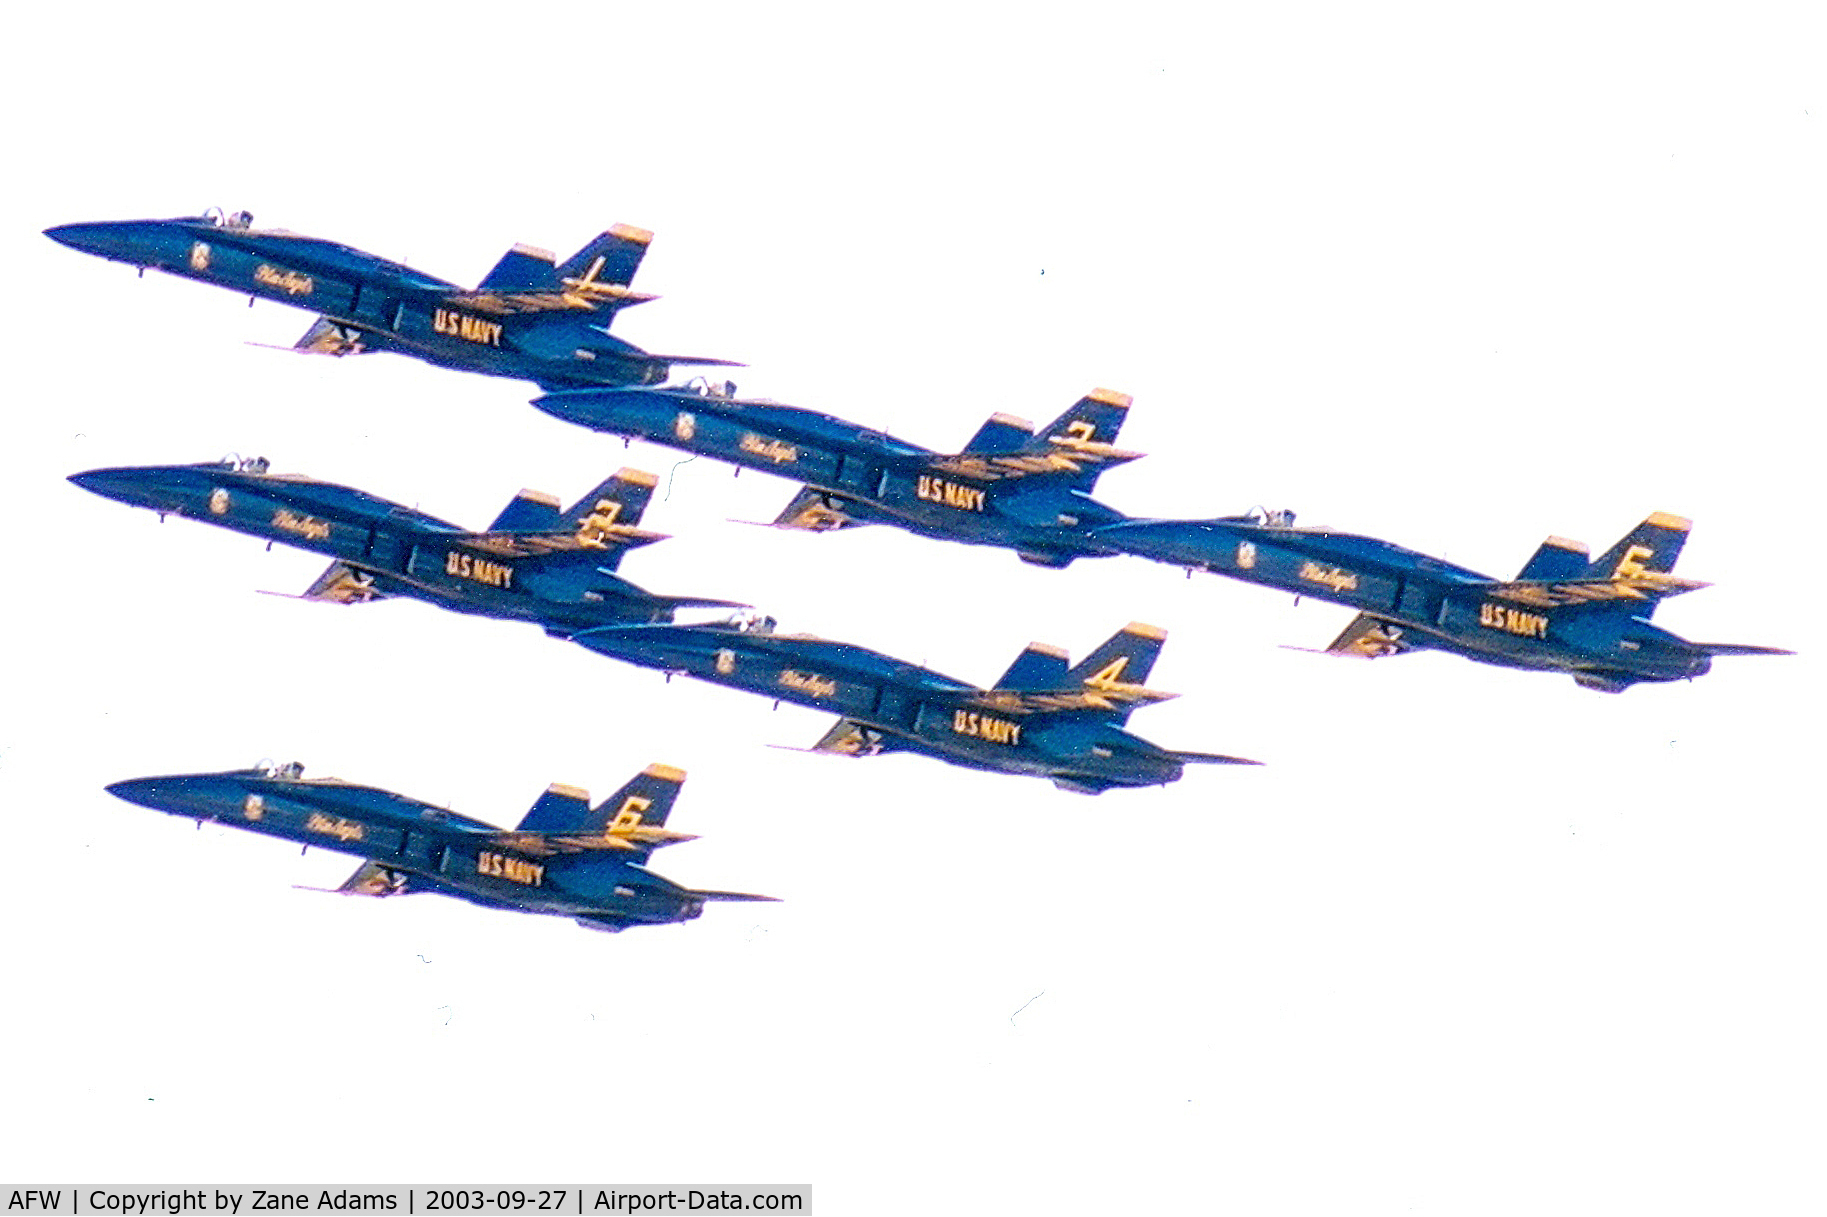 Fort Worth Alliance Airport (AFW) - US Navy Blue Angels at the Alliance Airshow 2003